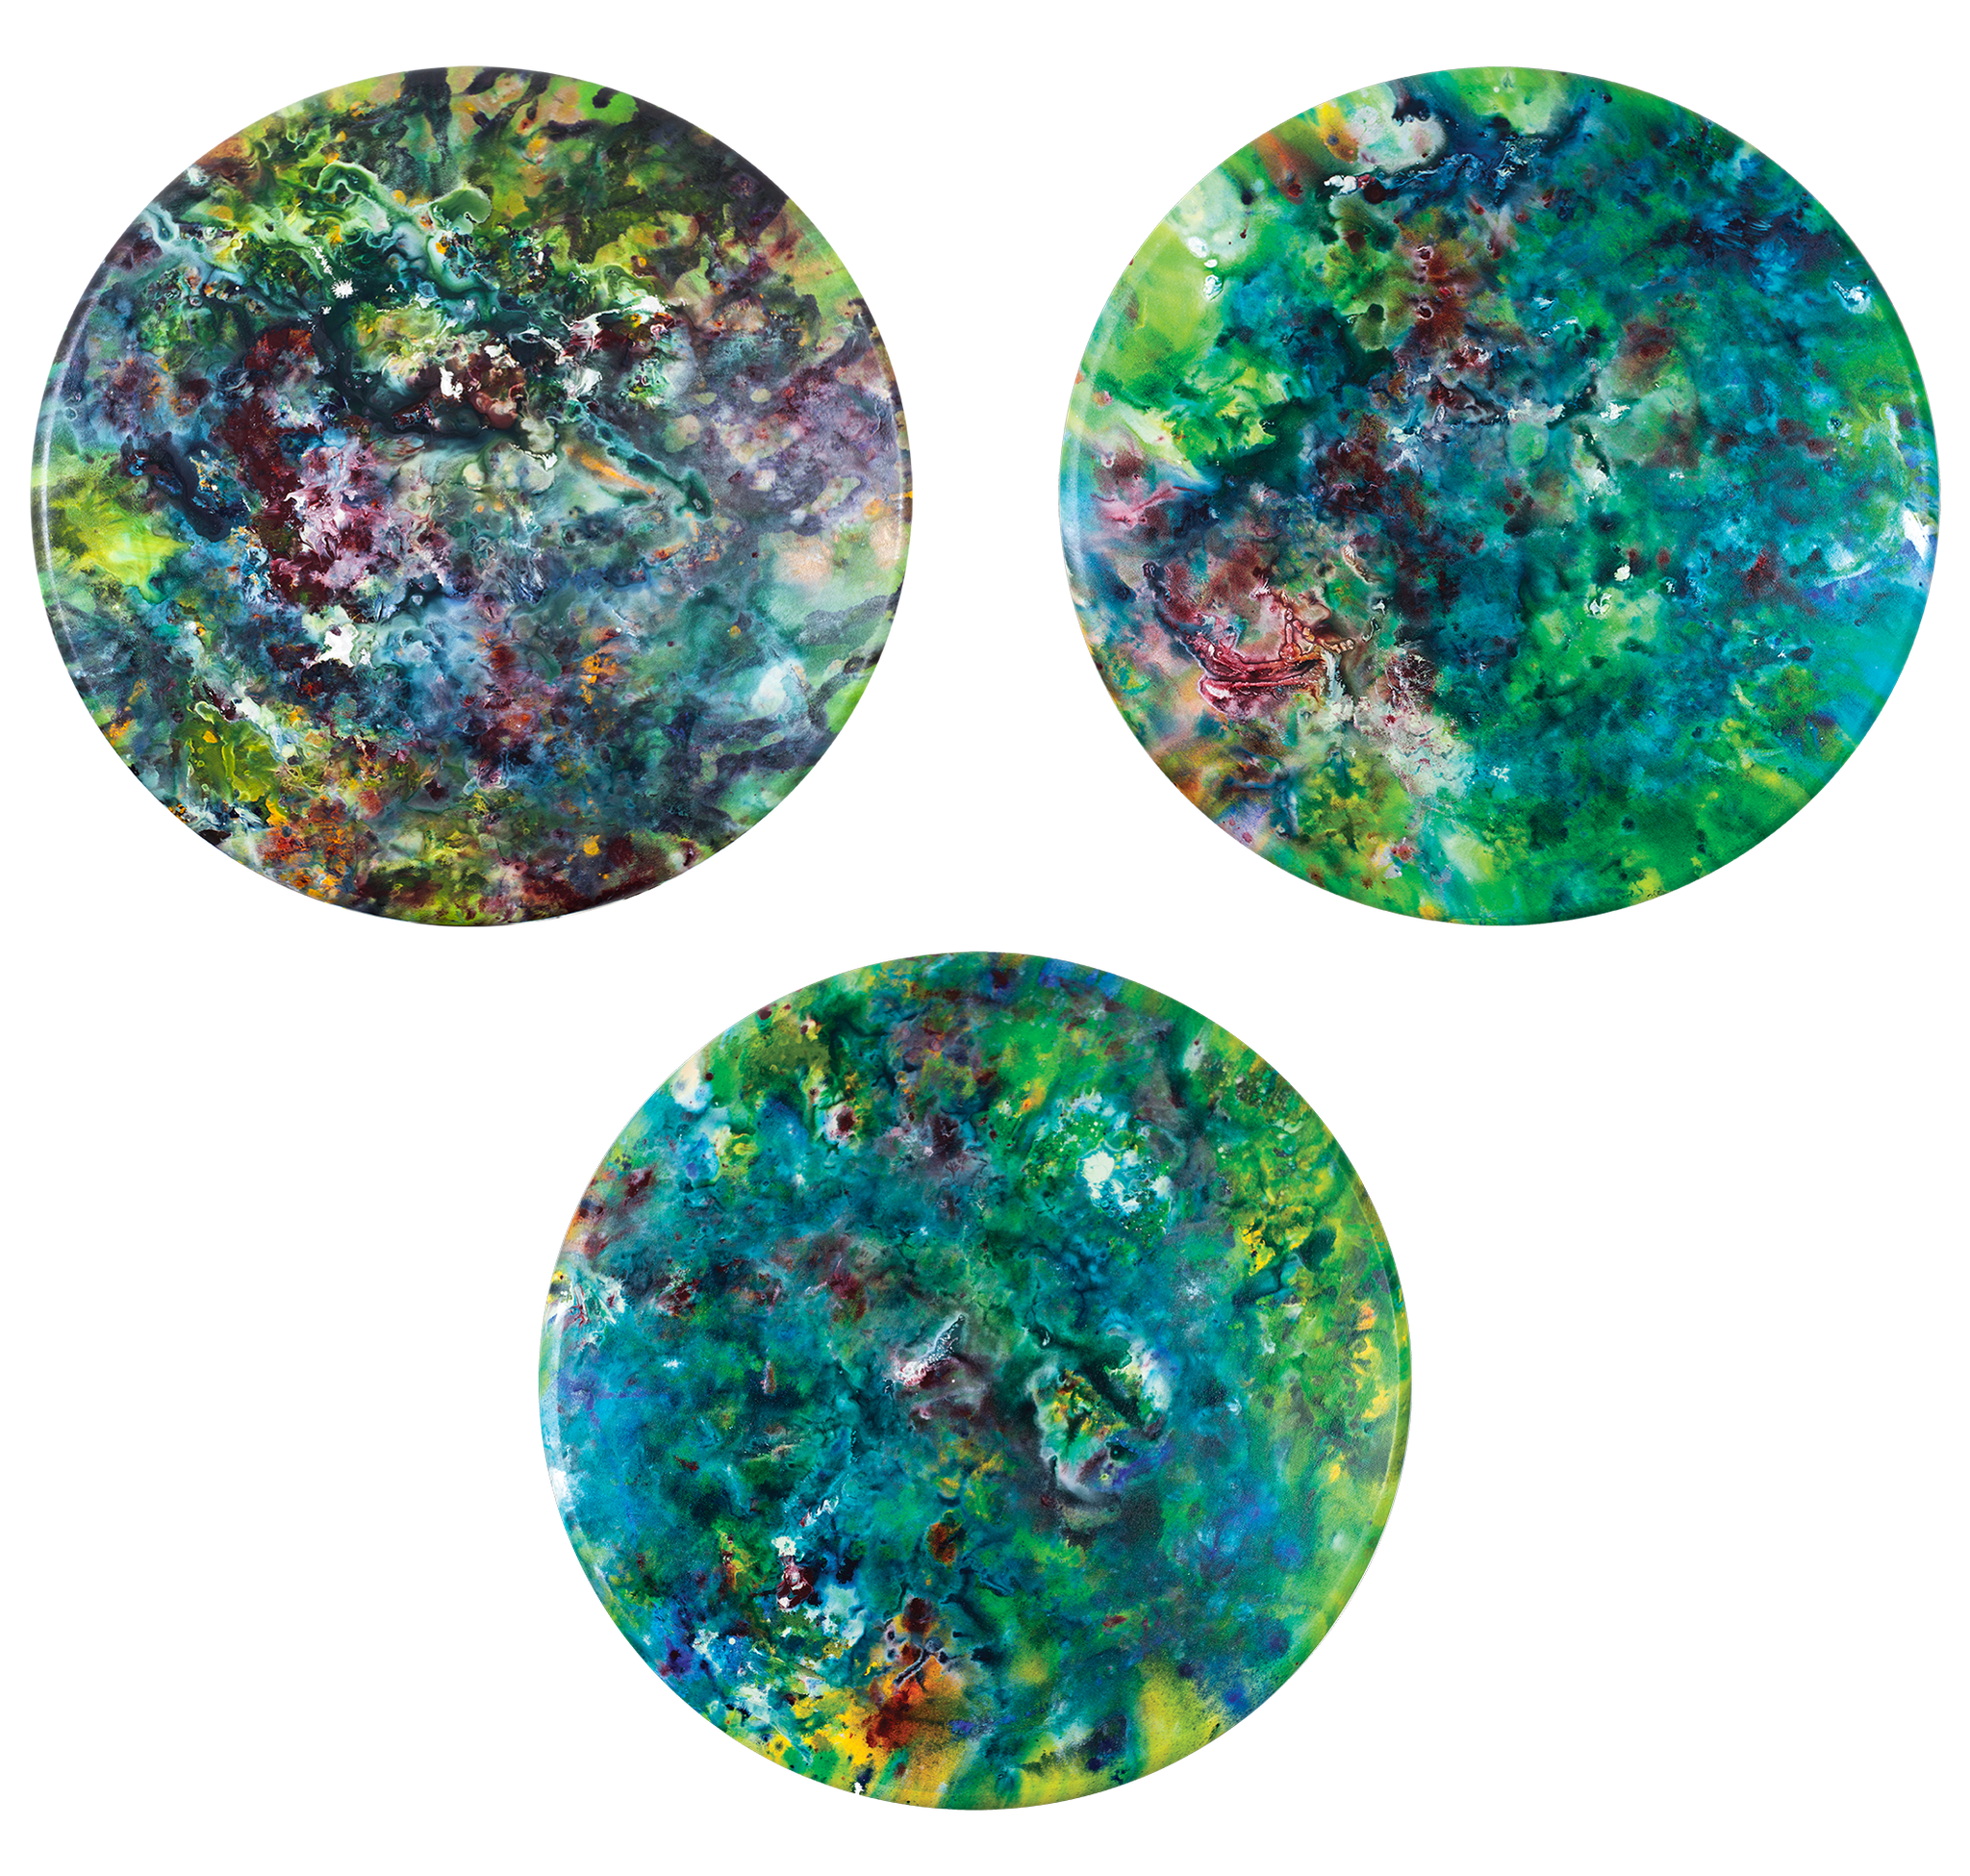 ©2022 Alicia R Peterson, *Between Three Worlds* (Trilogy). Acrylic on 30-inch diameter convex canvas. Photographer: Peter Scheer.